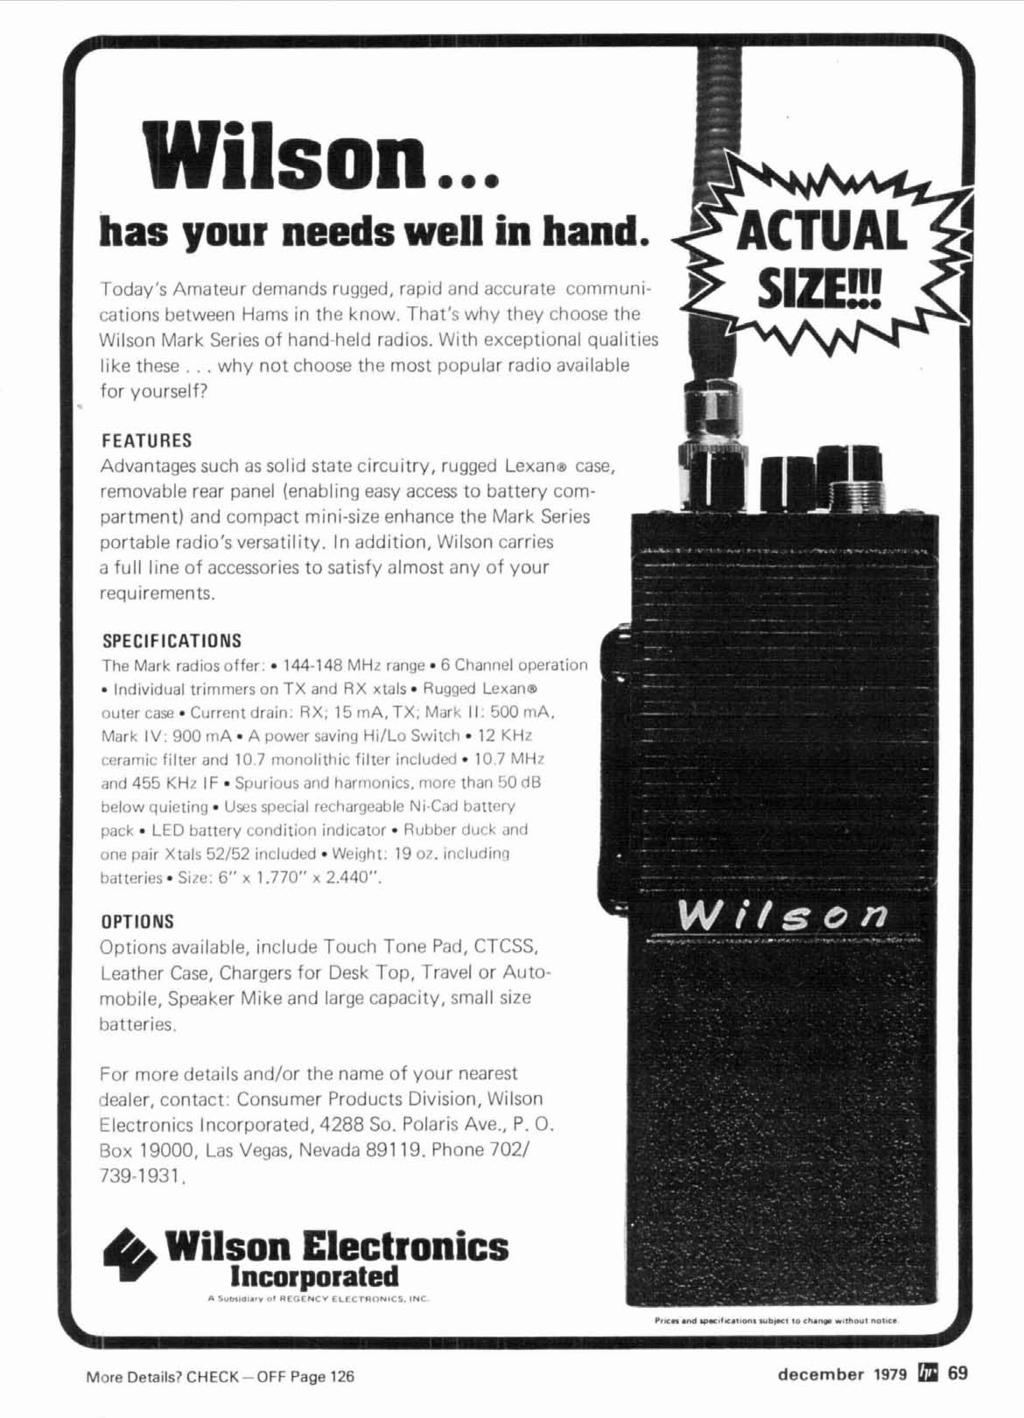 Wilson... has your needs well in hand. Today's Amateur demands rugged, rap~d and accurate communications between Hams in the know. That's why they choose the Wilson Mark Series of hand-held radios.